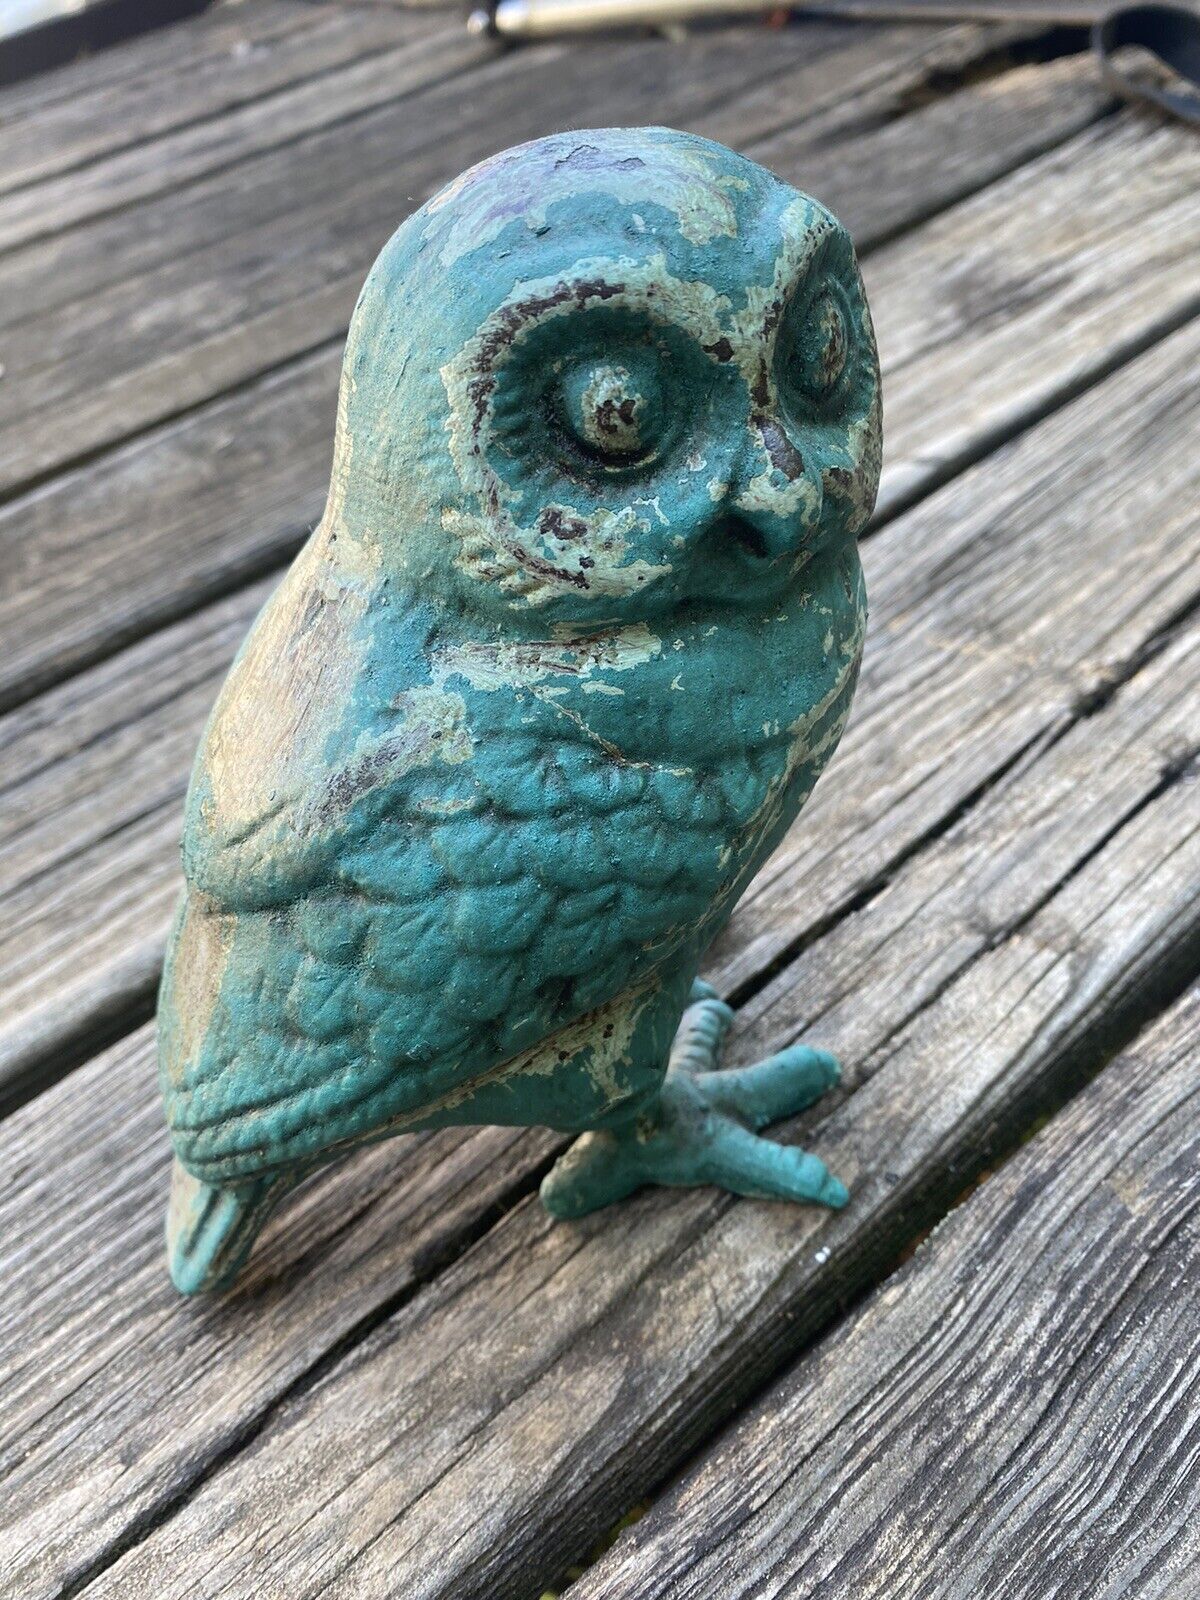 Shabby Victorian Chic Cottage Core Vintage Cast Iron Owl Statue. Hand Painted.